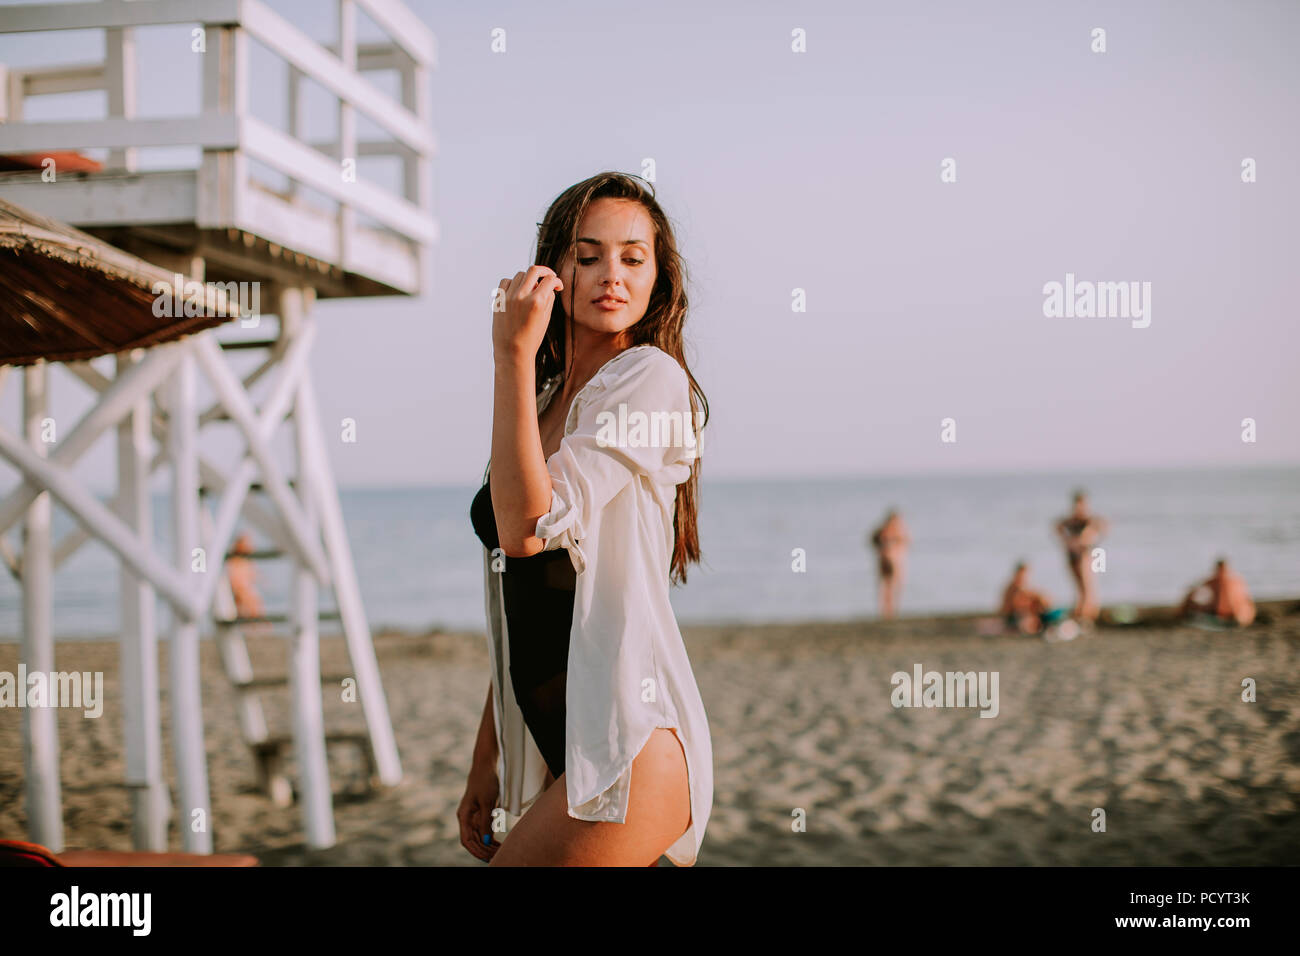 View at young woman posing on the beach by lifeguard observation tower Stock Photo